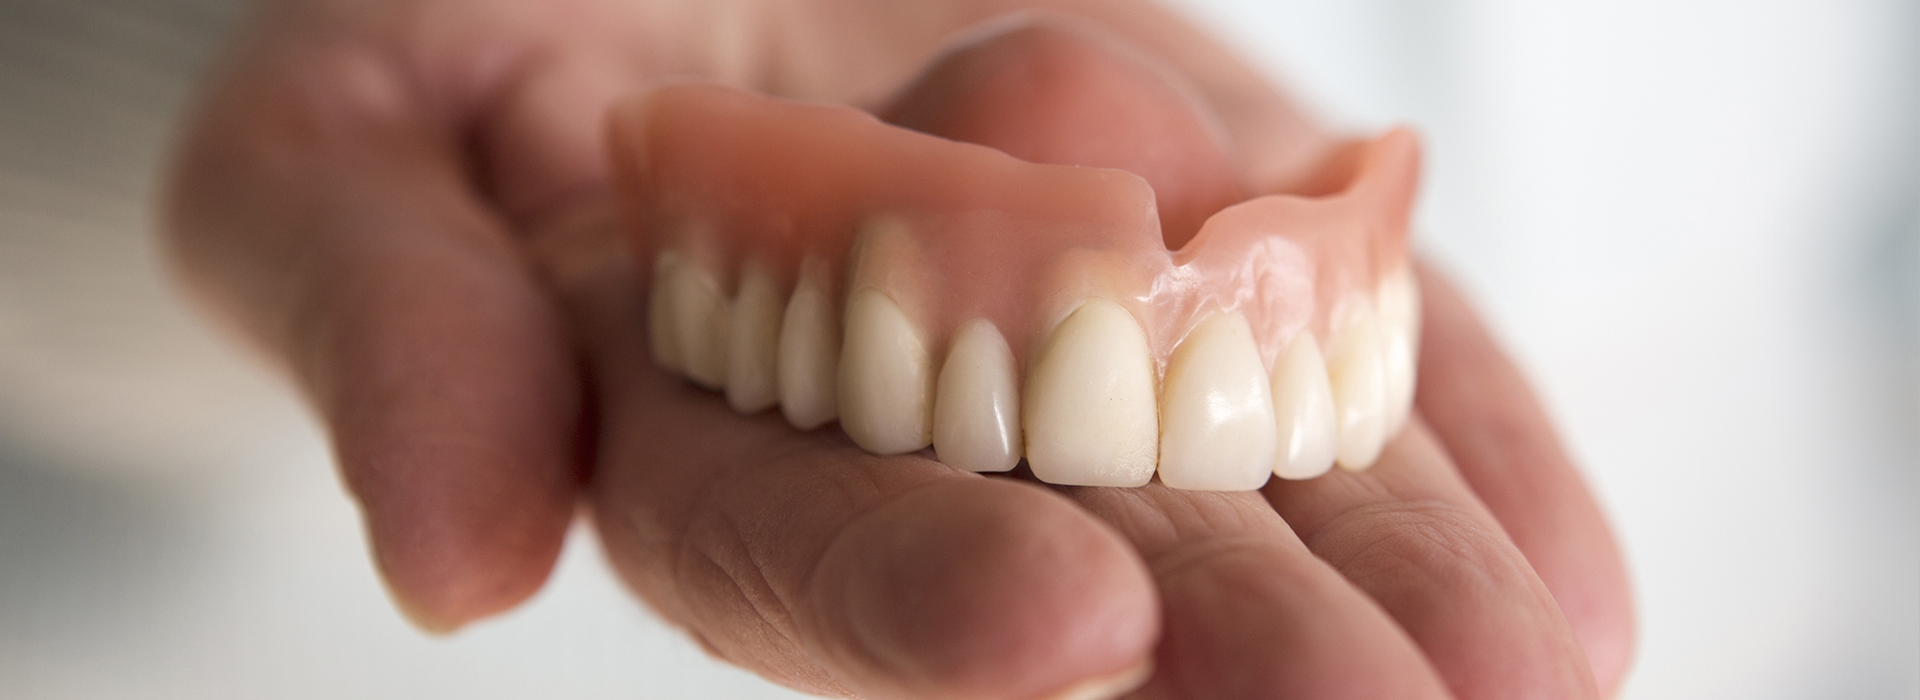 The image shows a person holding up a set of dentures, displaying the upper and lower teeth.